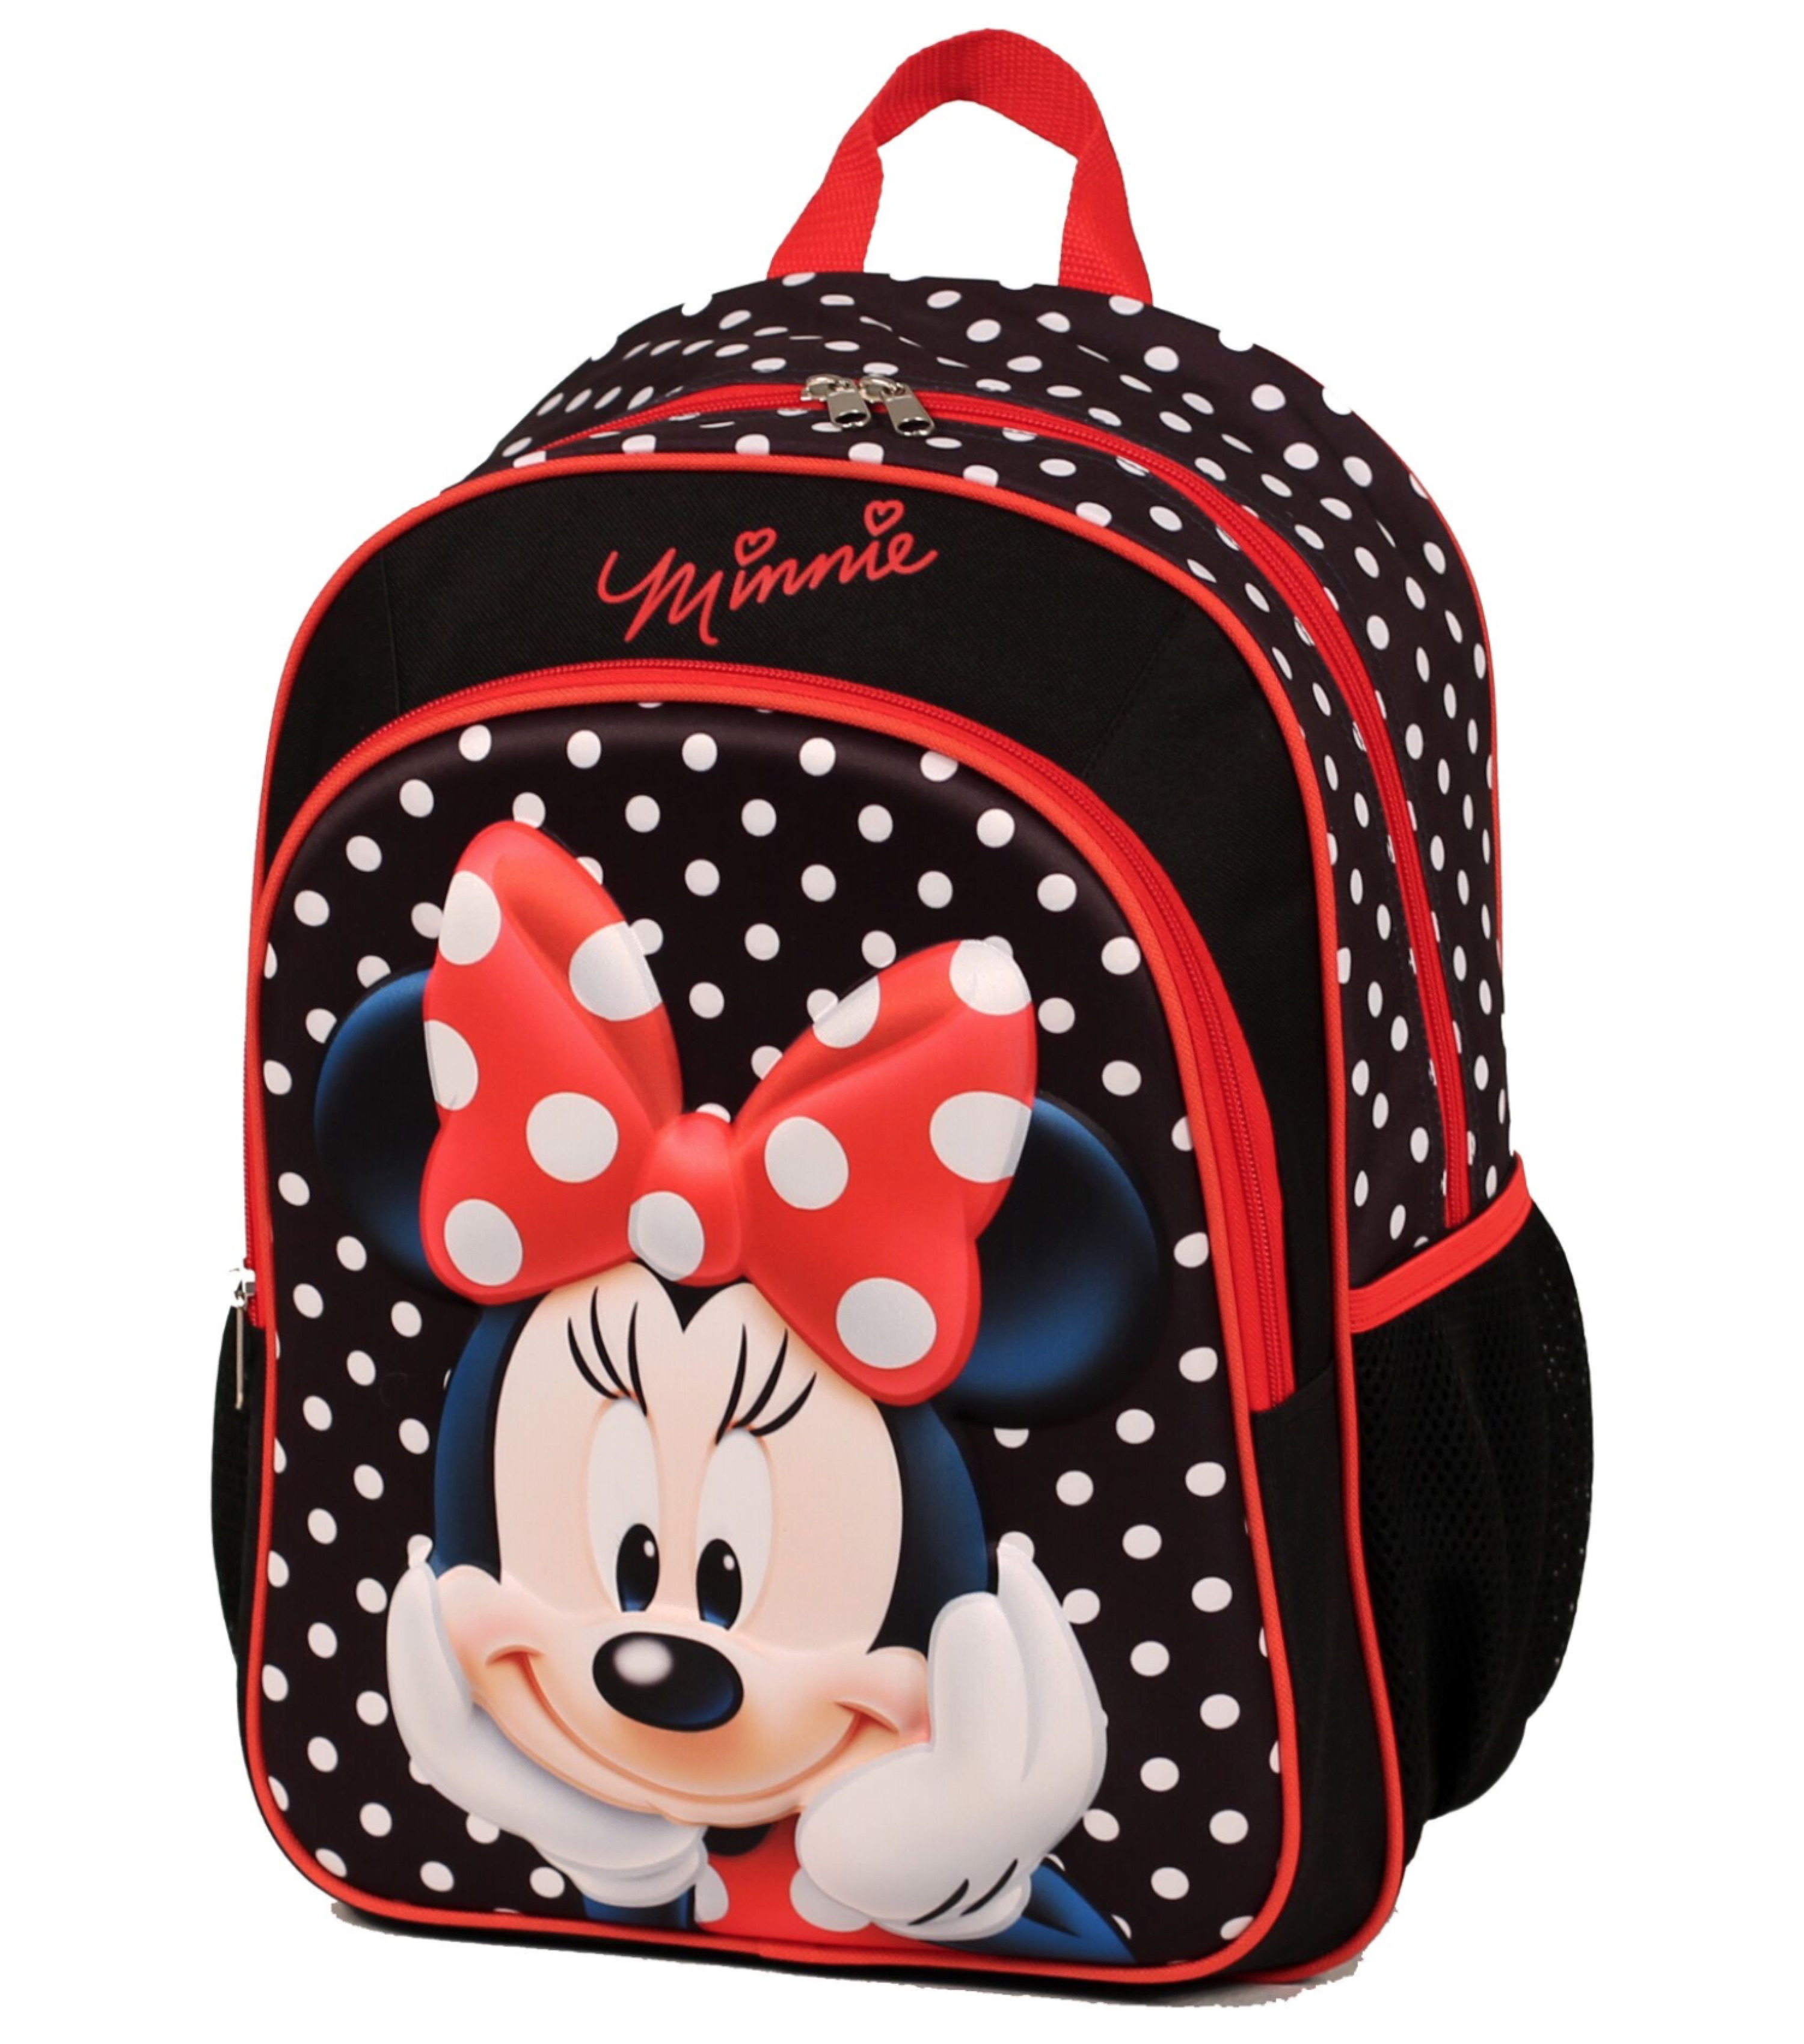 Disney Minnie Mouse Kids Backpack by Disney (DIS180)